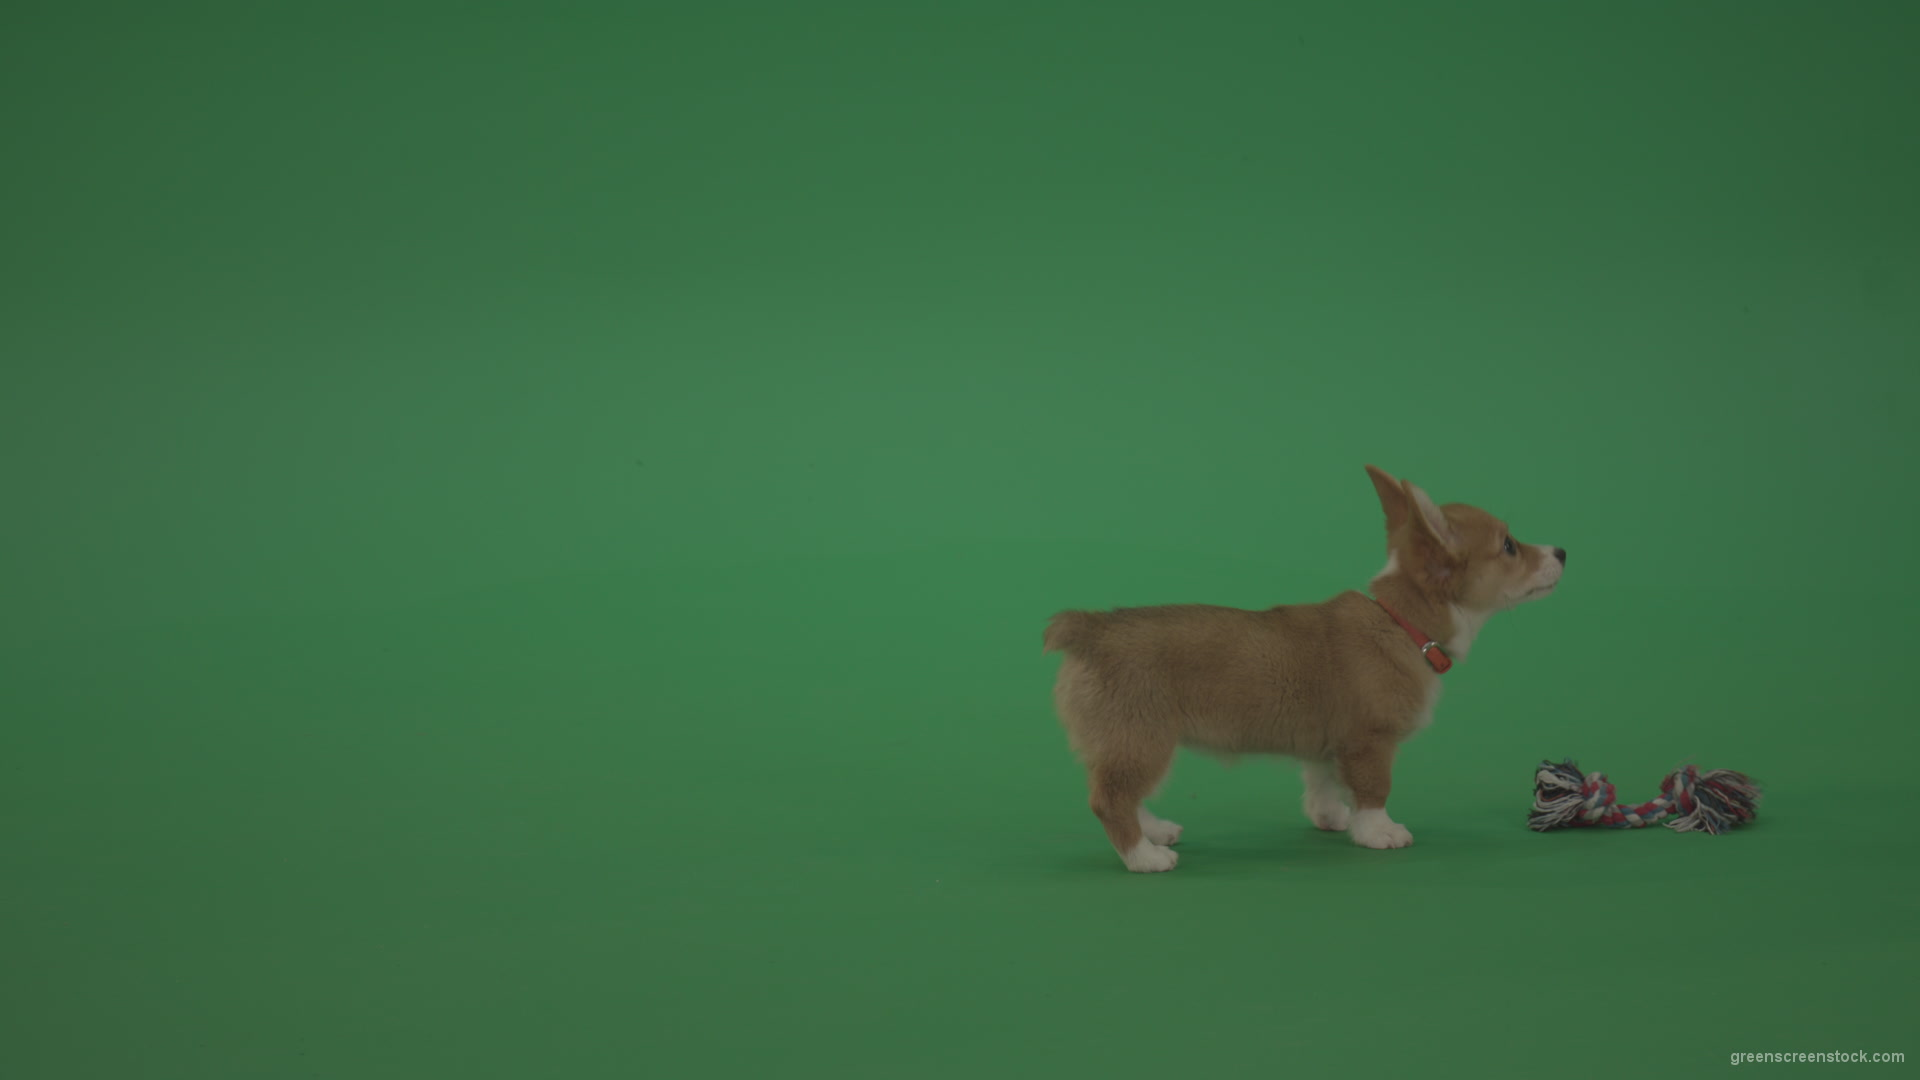 Small-toy-Korgi-welsh-dog-play-with-doll-on-green-screen-isolated_005 Green Screen Stock